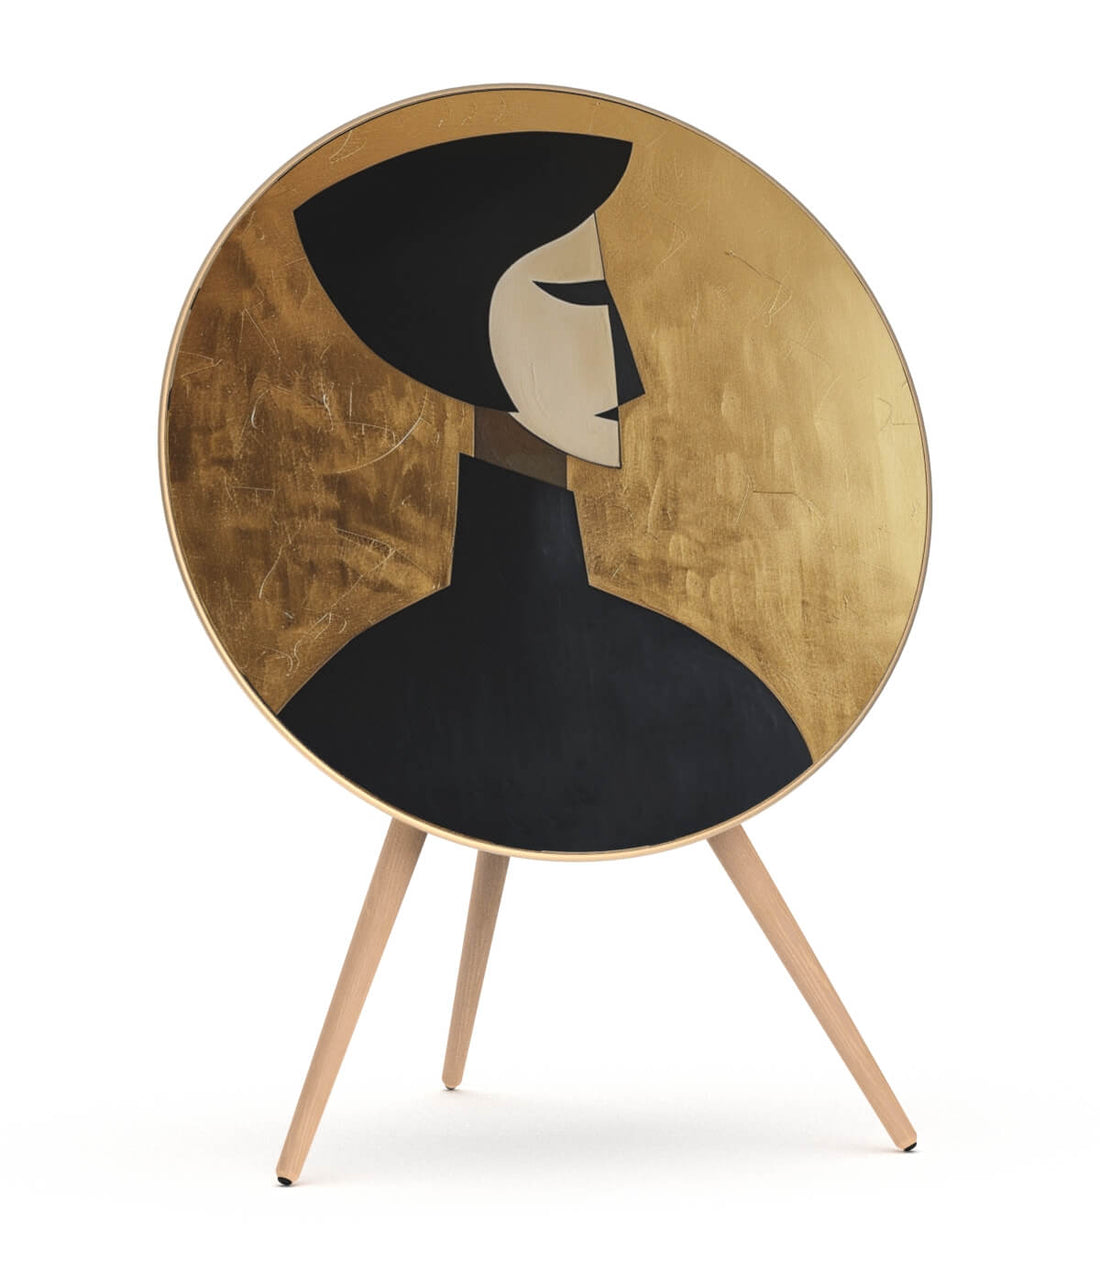 Skiniplay Timeless Contemplation cover for Bang é Olufsen Beoplay / Beosound A9 speaker